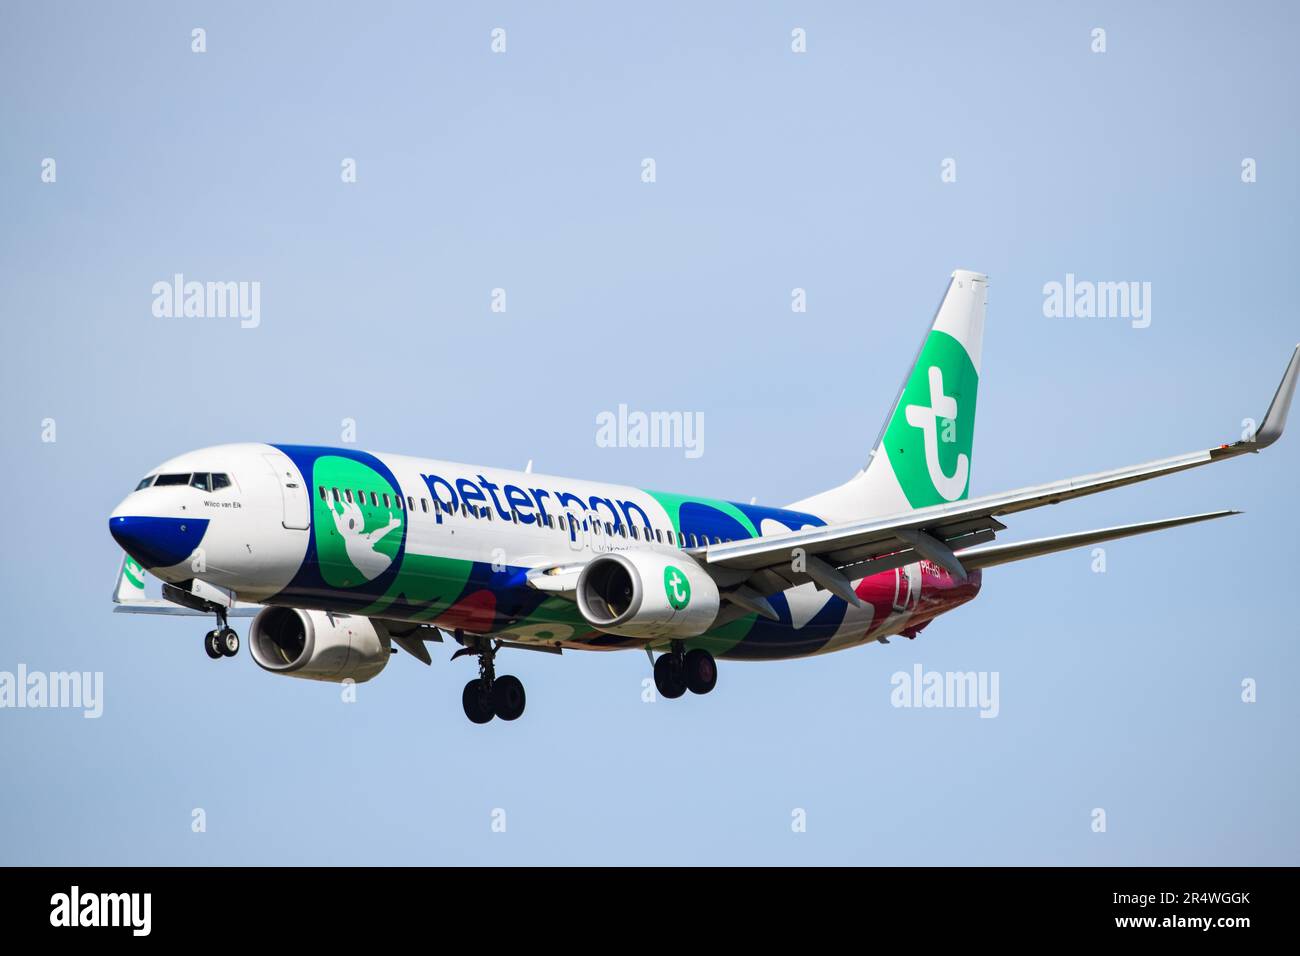 Barcelona,Spain- october,11, 2018: PH-HSI, Transavia Airlines, Boeing 737-800, aircraft approaching the runway for a landing at Barcelona-El Prat Stock Photo